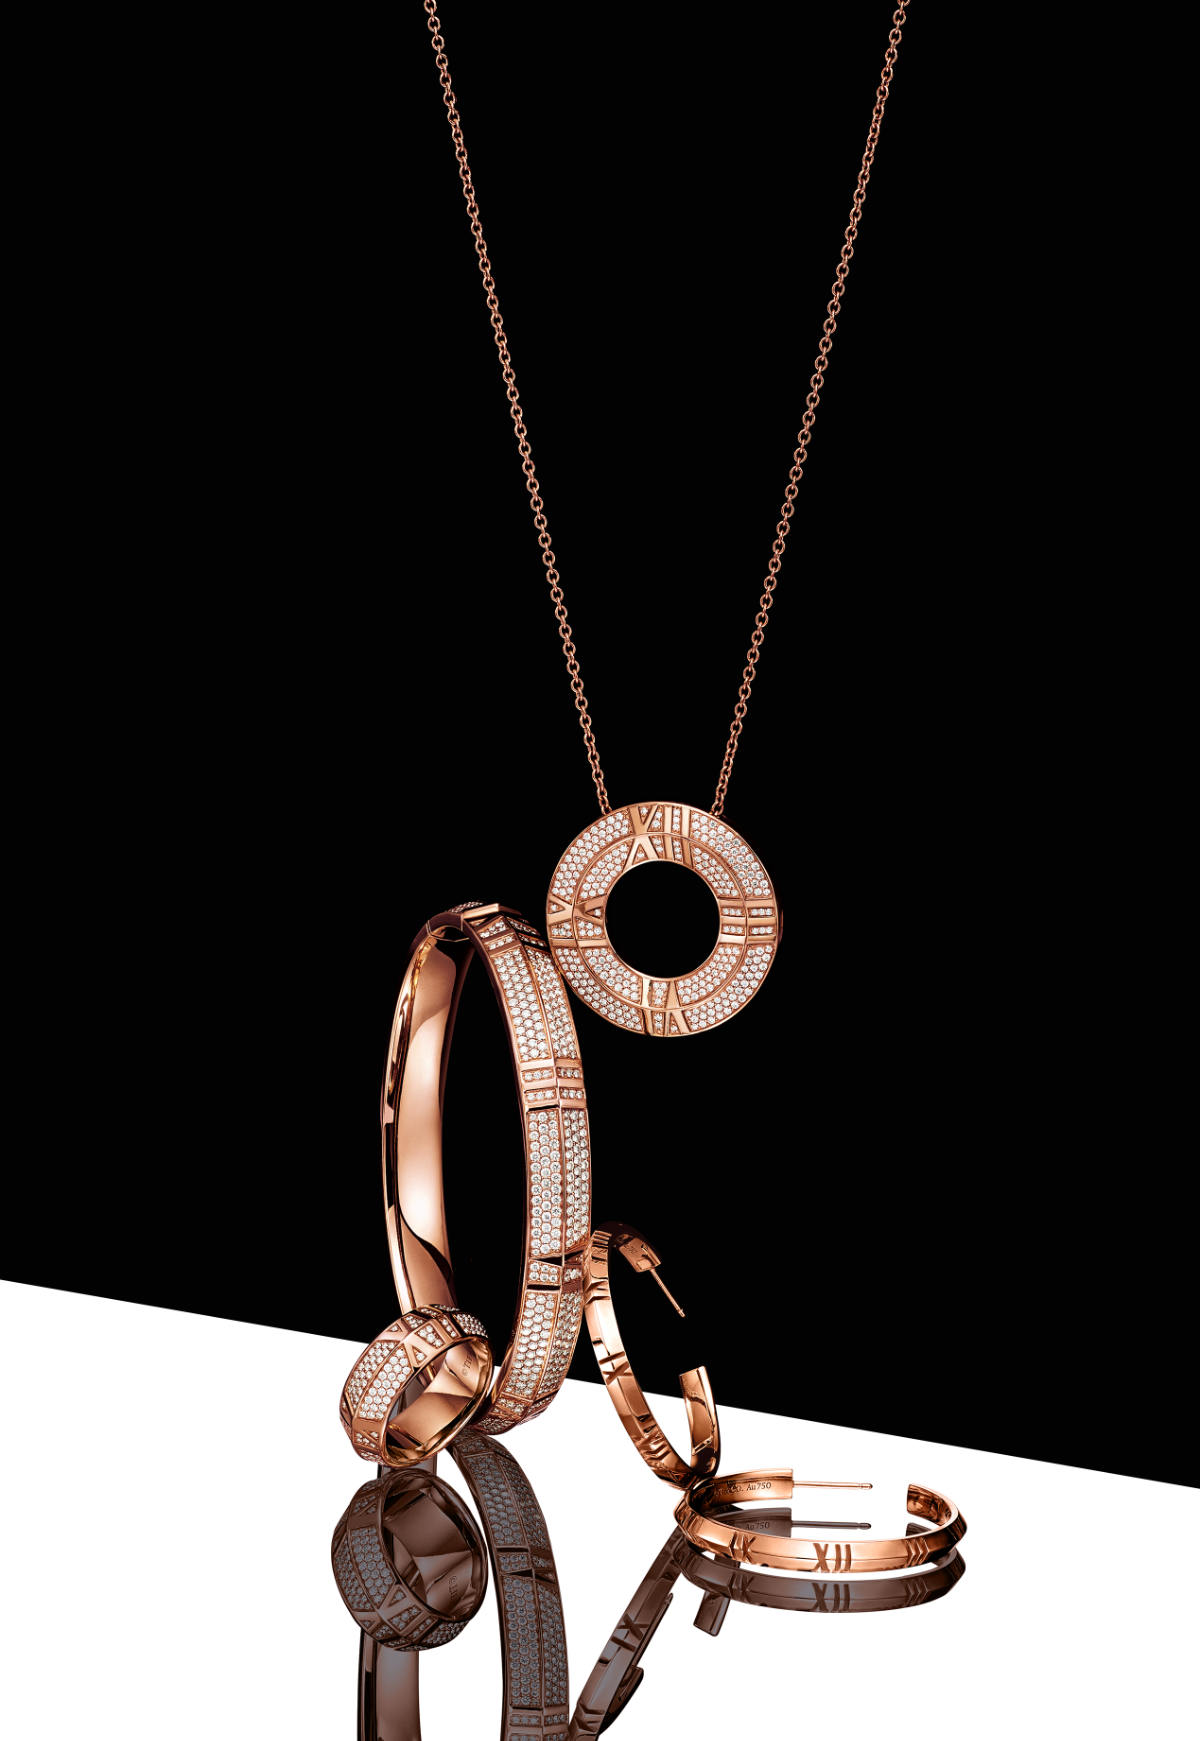 A Sneak Peek At Tiffany's New Atlas Collection - Haute Living